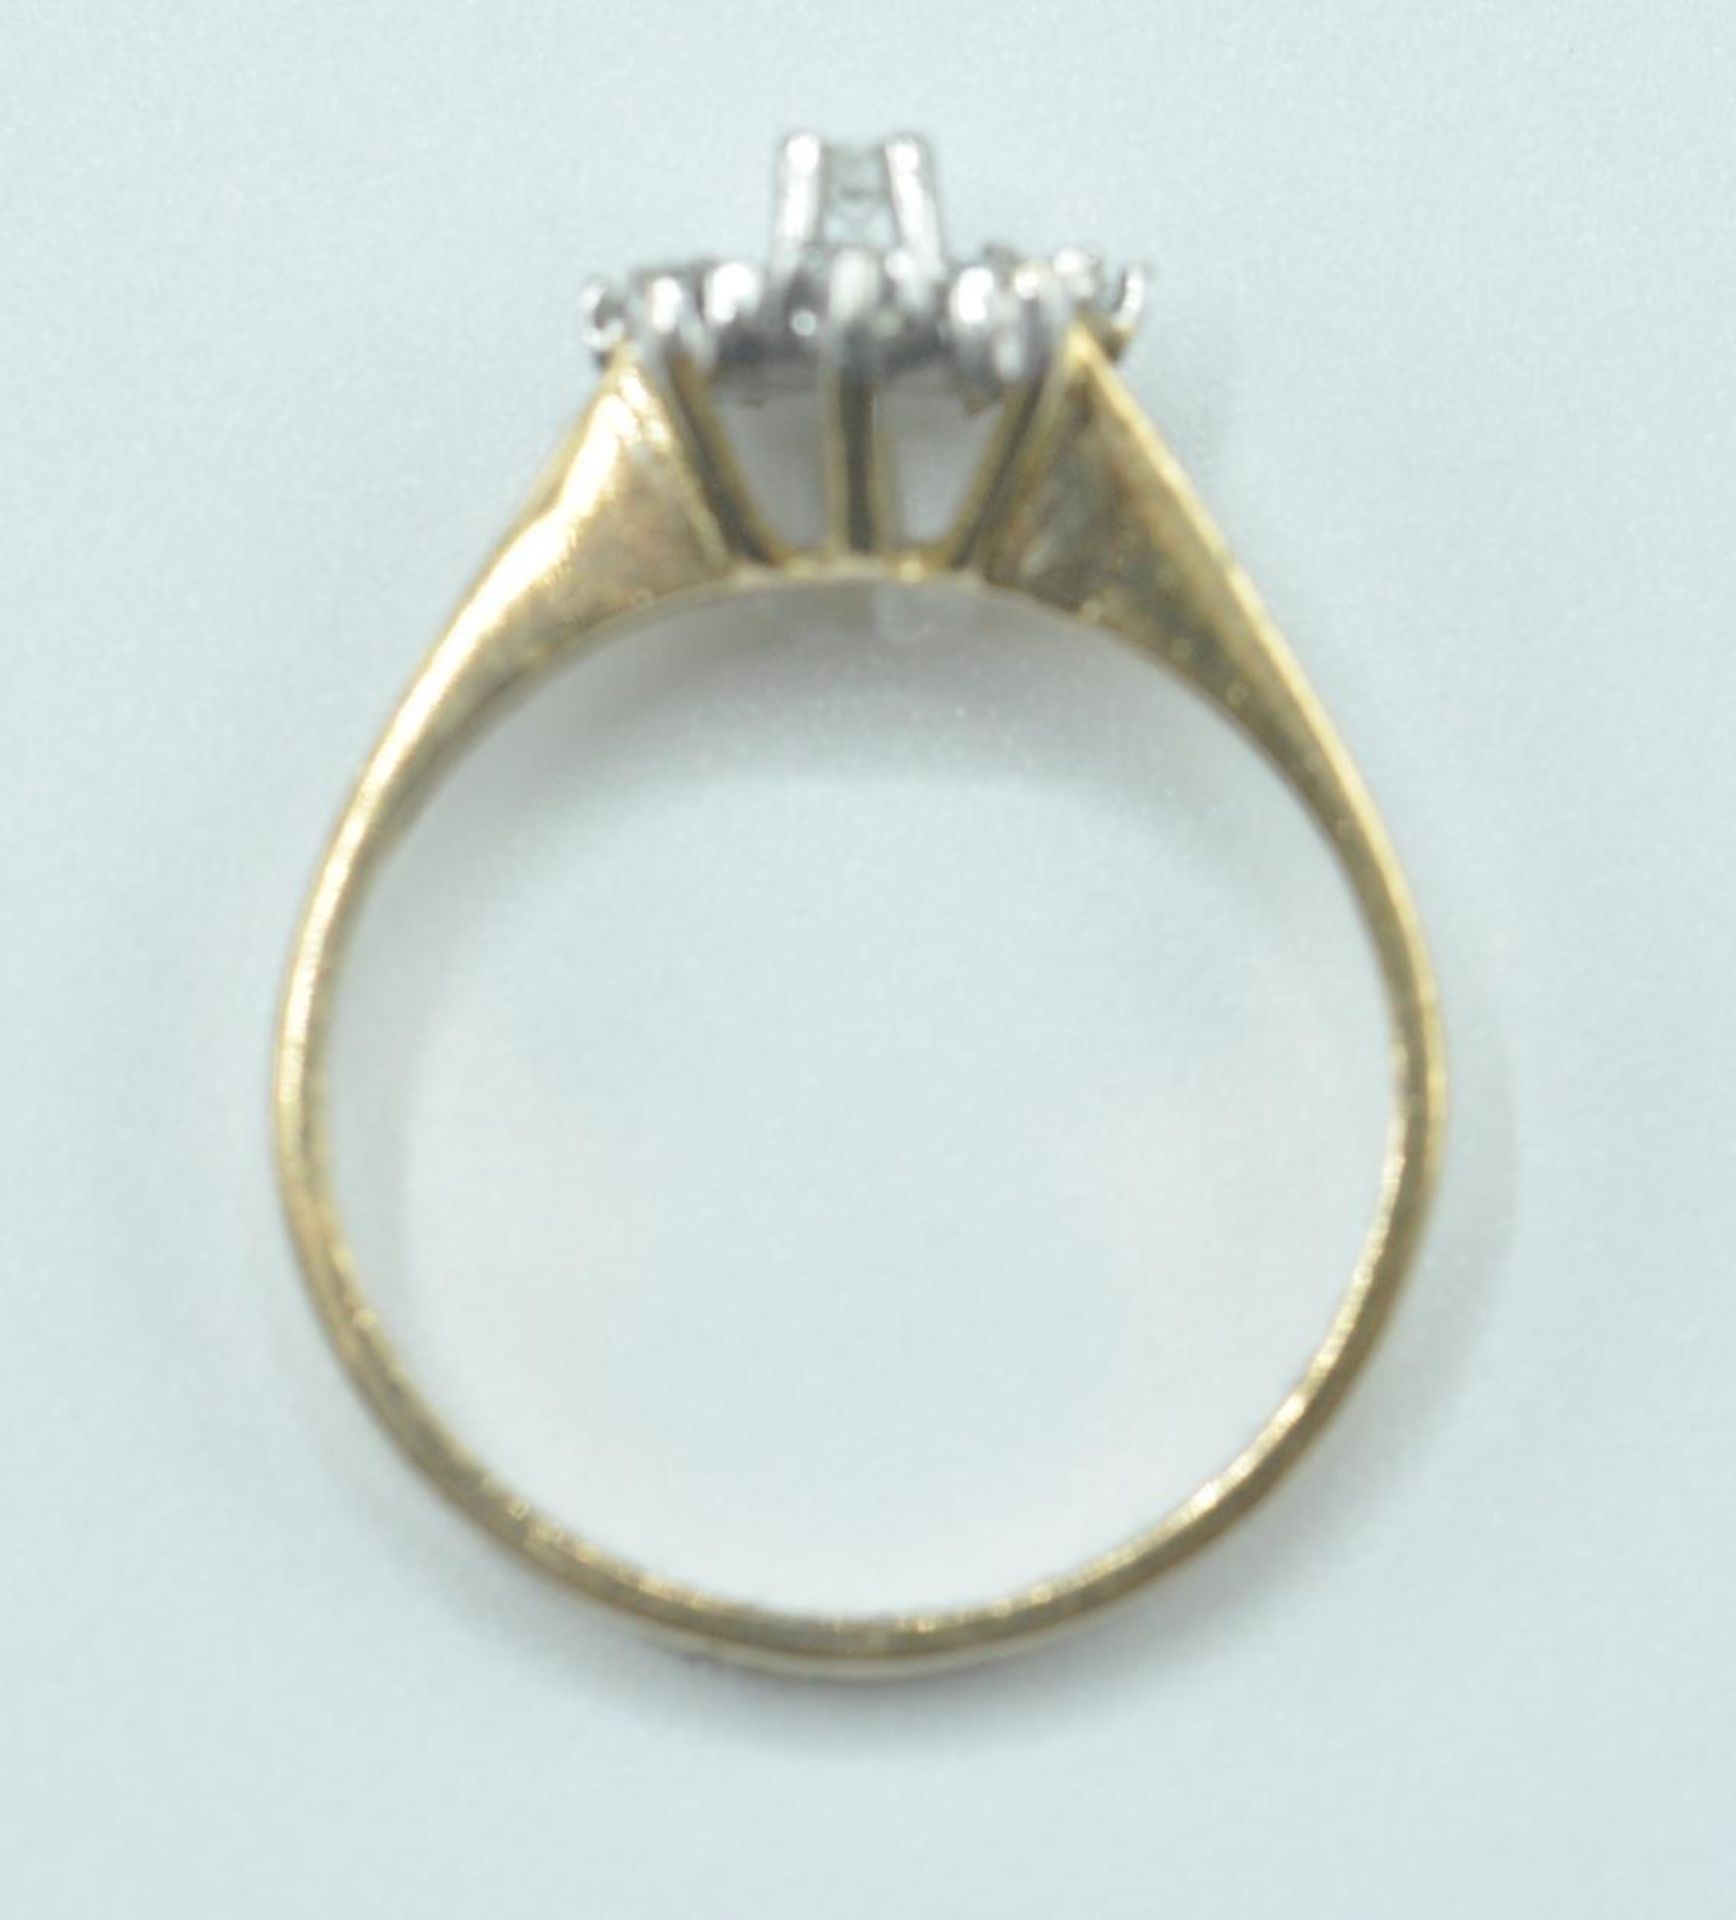 YELLOW GOLD AND DIAMOND RING - Image 8 of 8